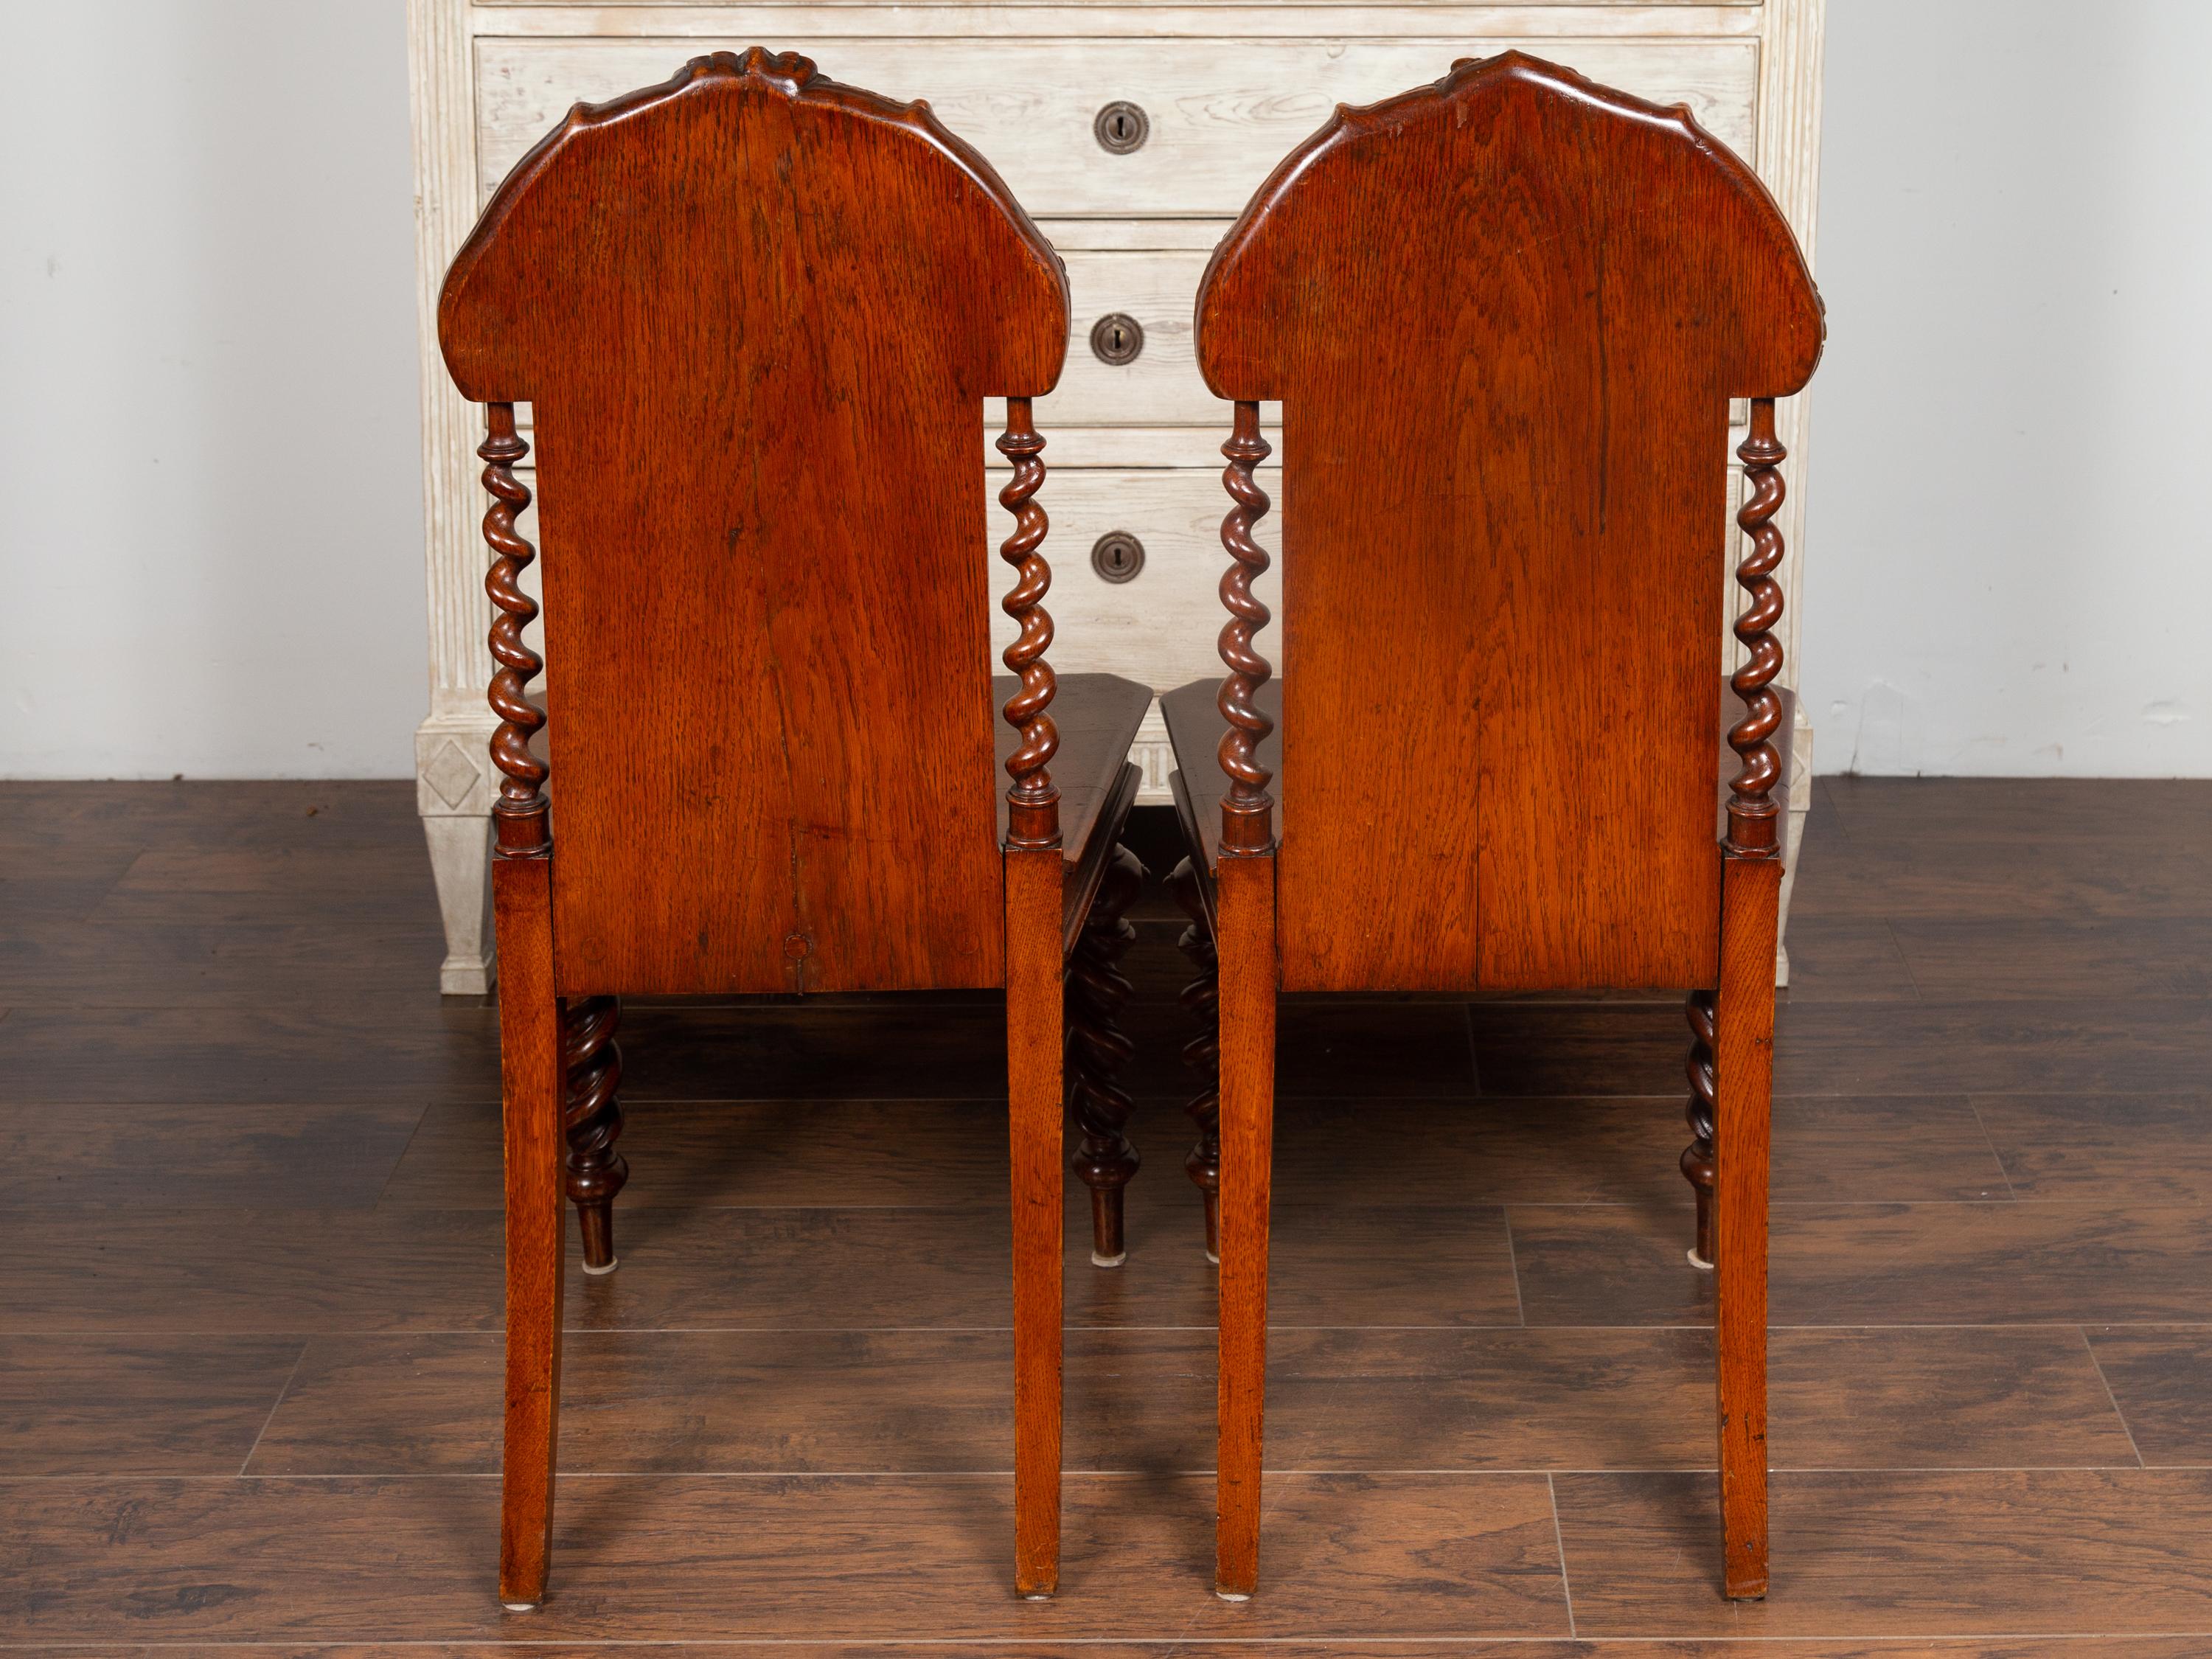 Pair of 1880s English Barley Twist Oak Hall Chairs with Foliage and Acorn Motifs 6